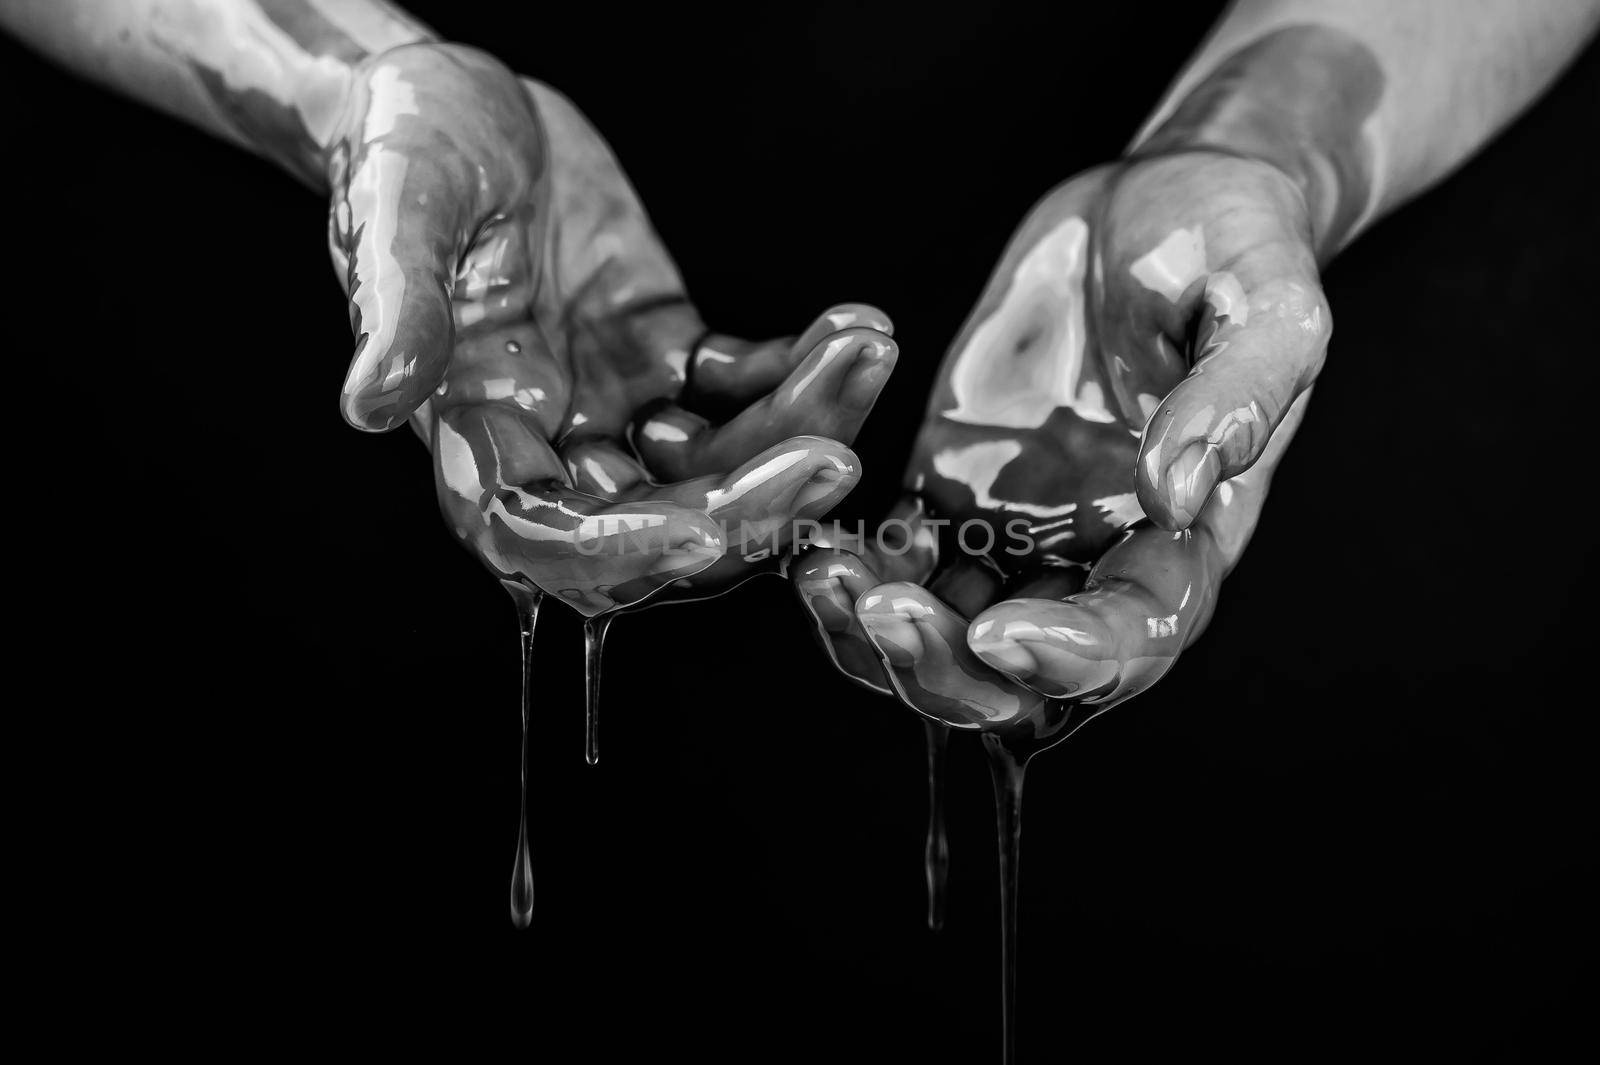 Women's hands in a viscous liquid similar to blood. Black and white photo. by mrwed54